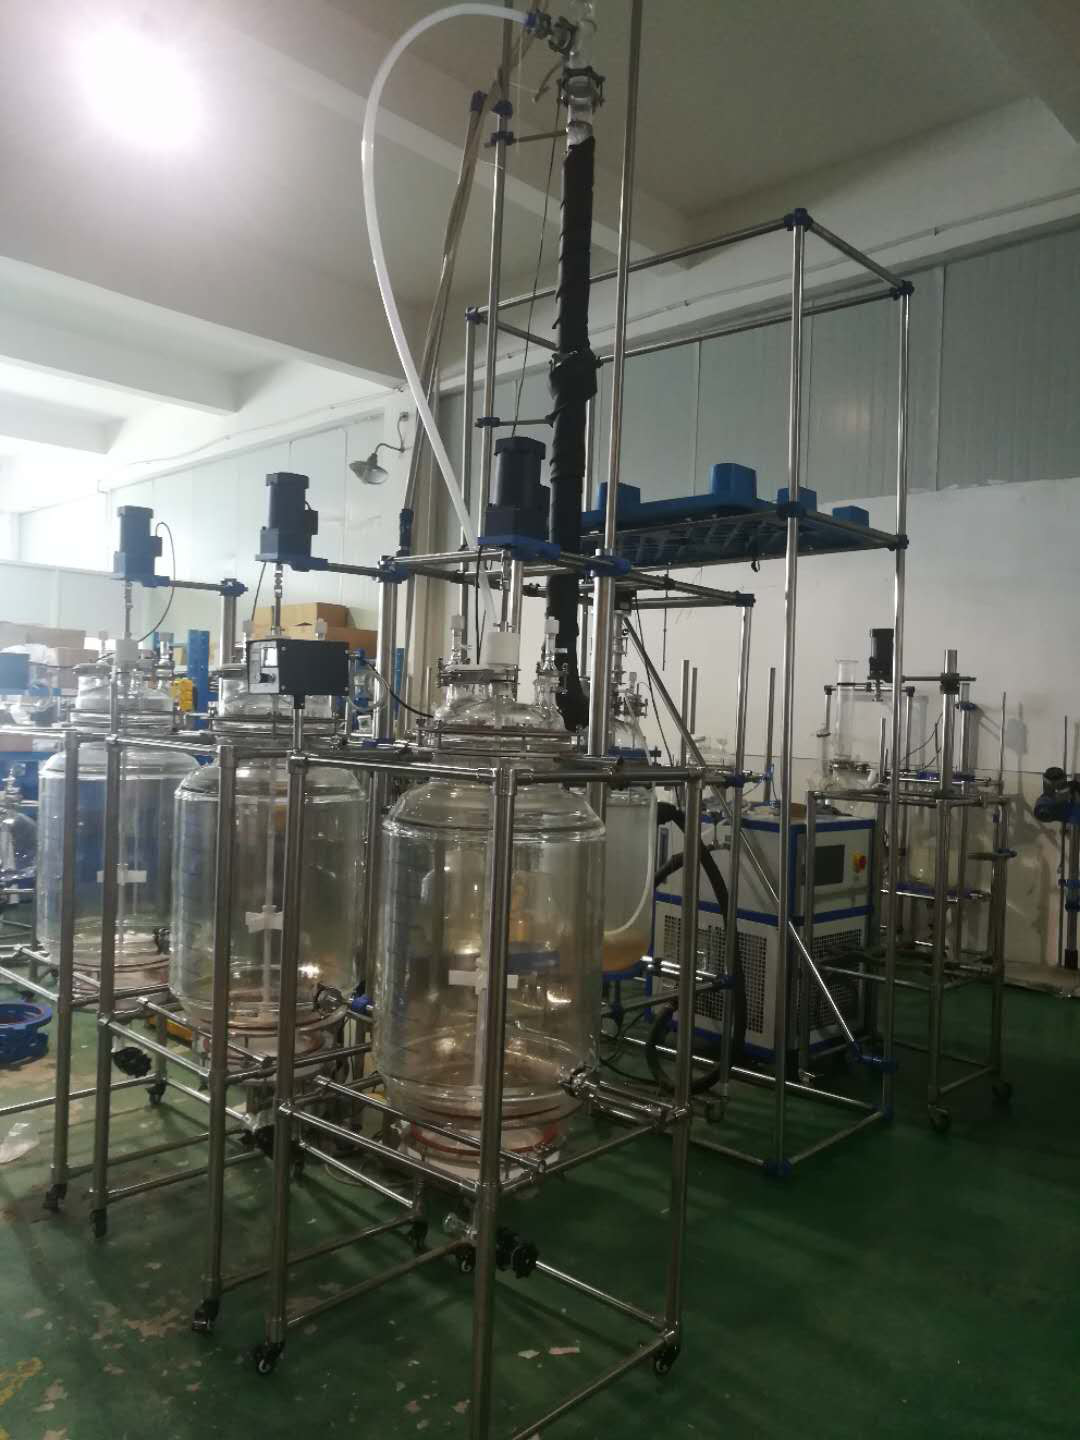  Double Glass Reactor for hemp/Chemical Laboratory Medicine Research and Development Double-Layer Jacketed Glass Reactor Manufactures